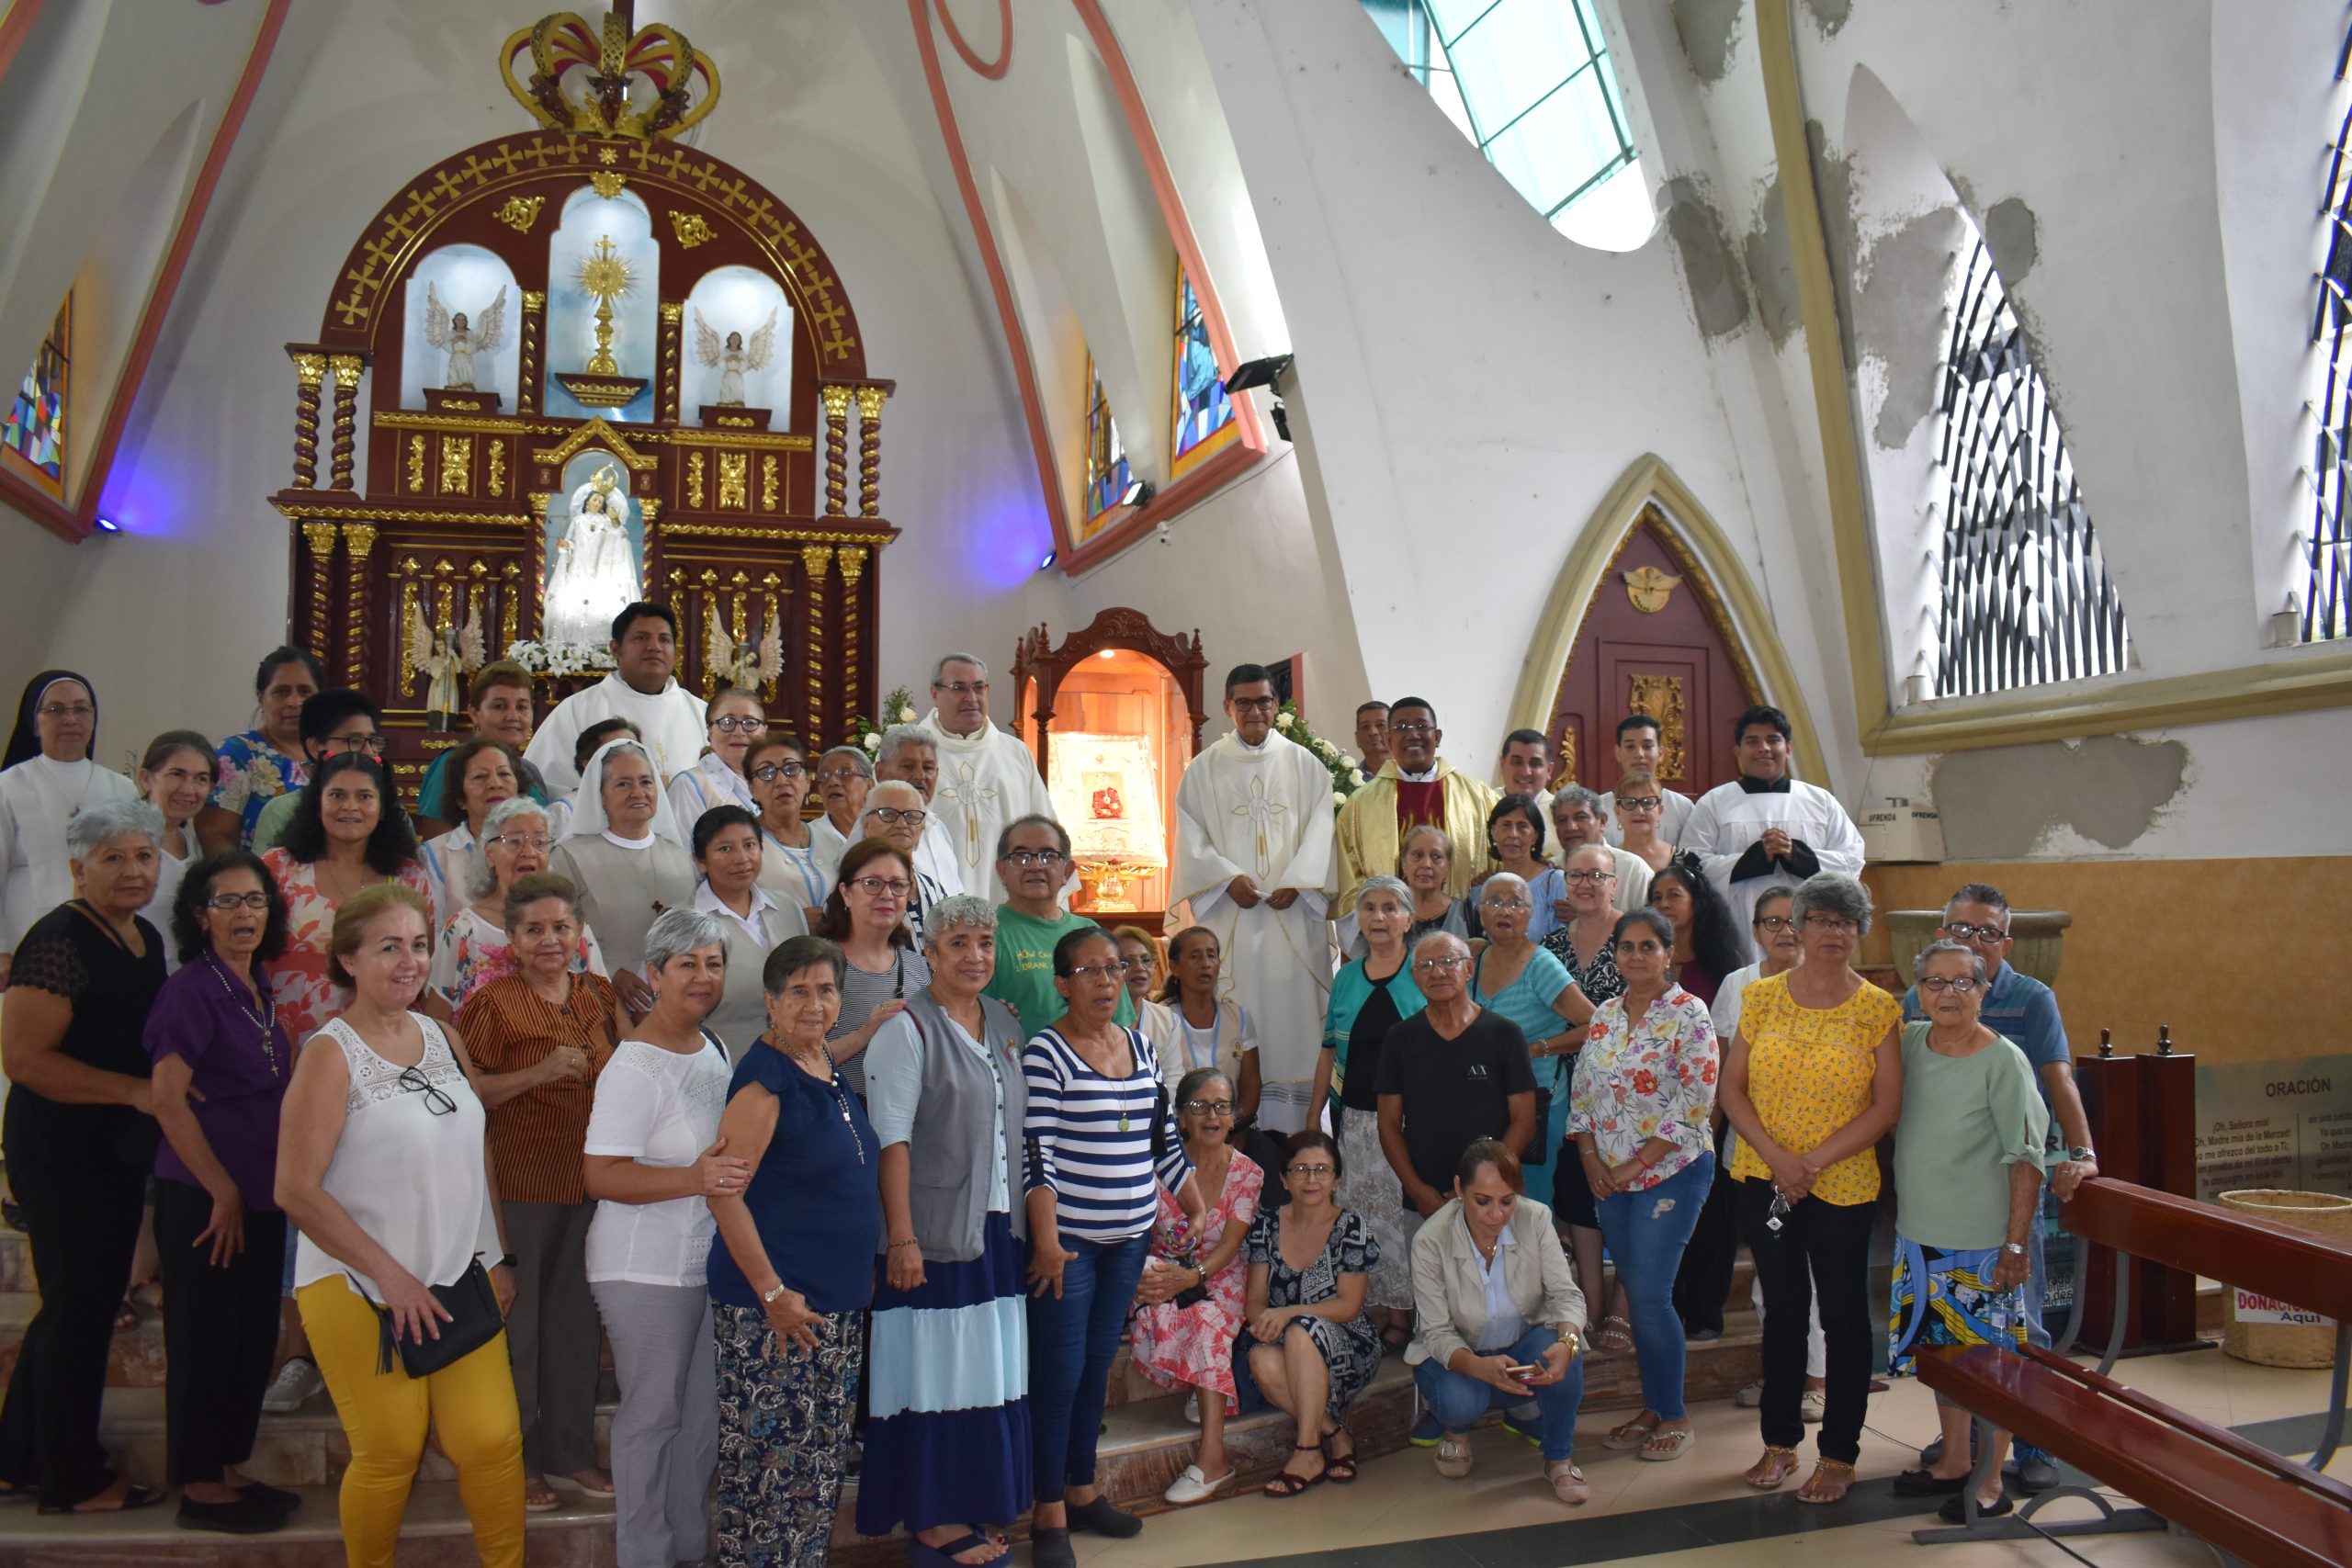 Testimony of faith and fraternity in the journey of the Gospel in the Archdiocese of Portoviejo.